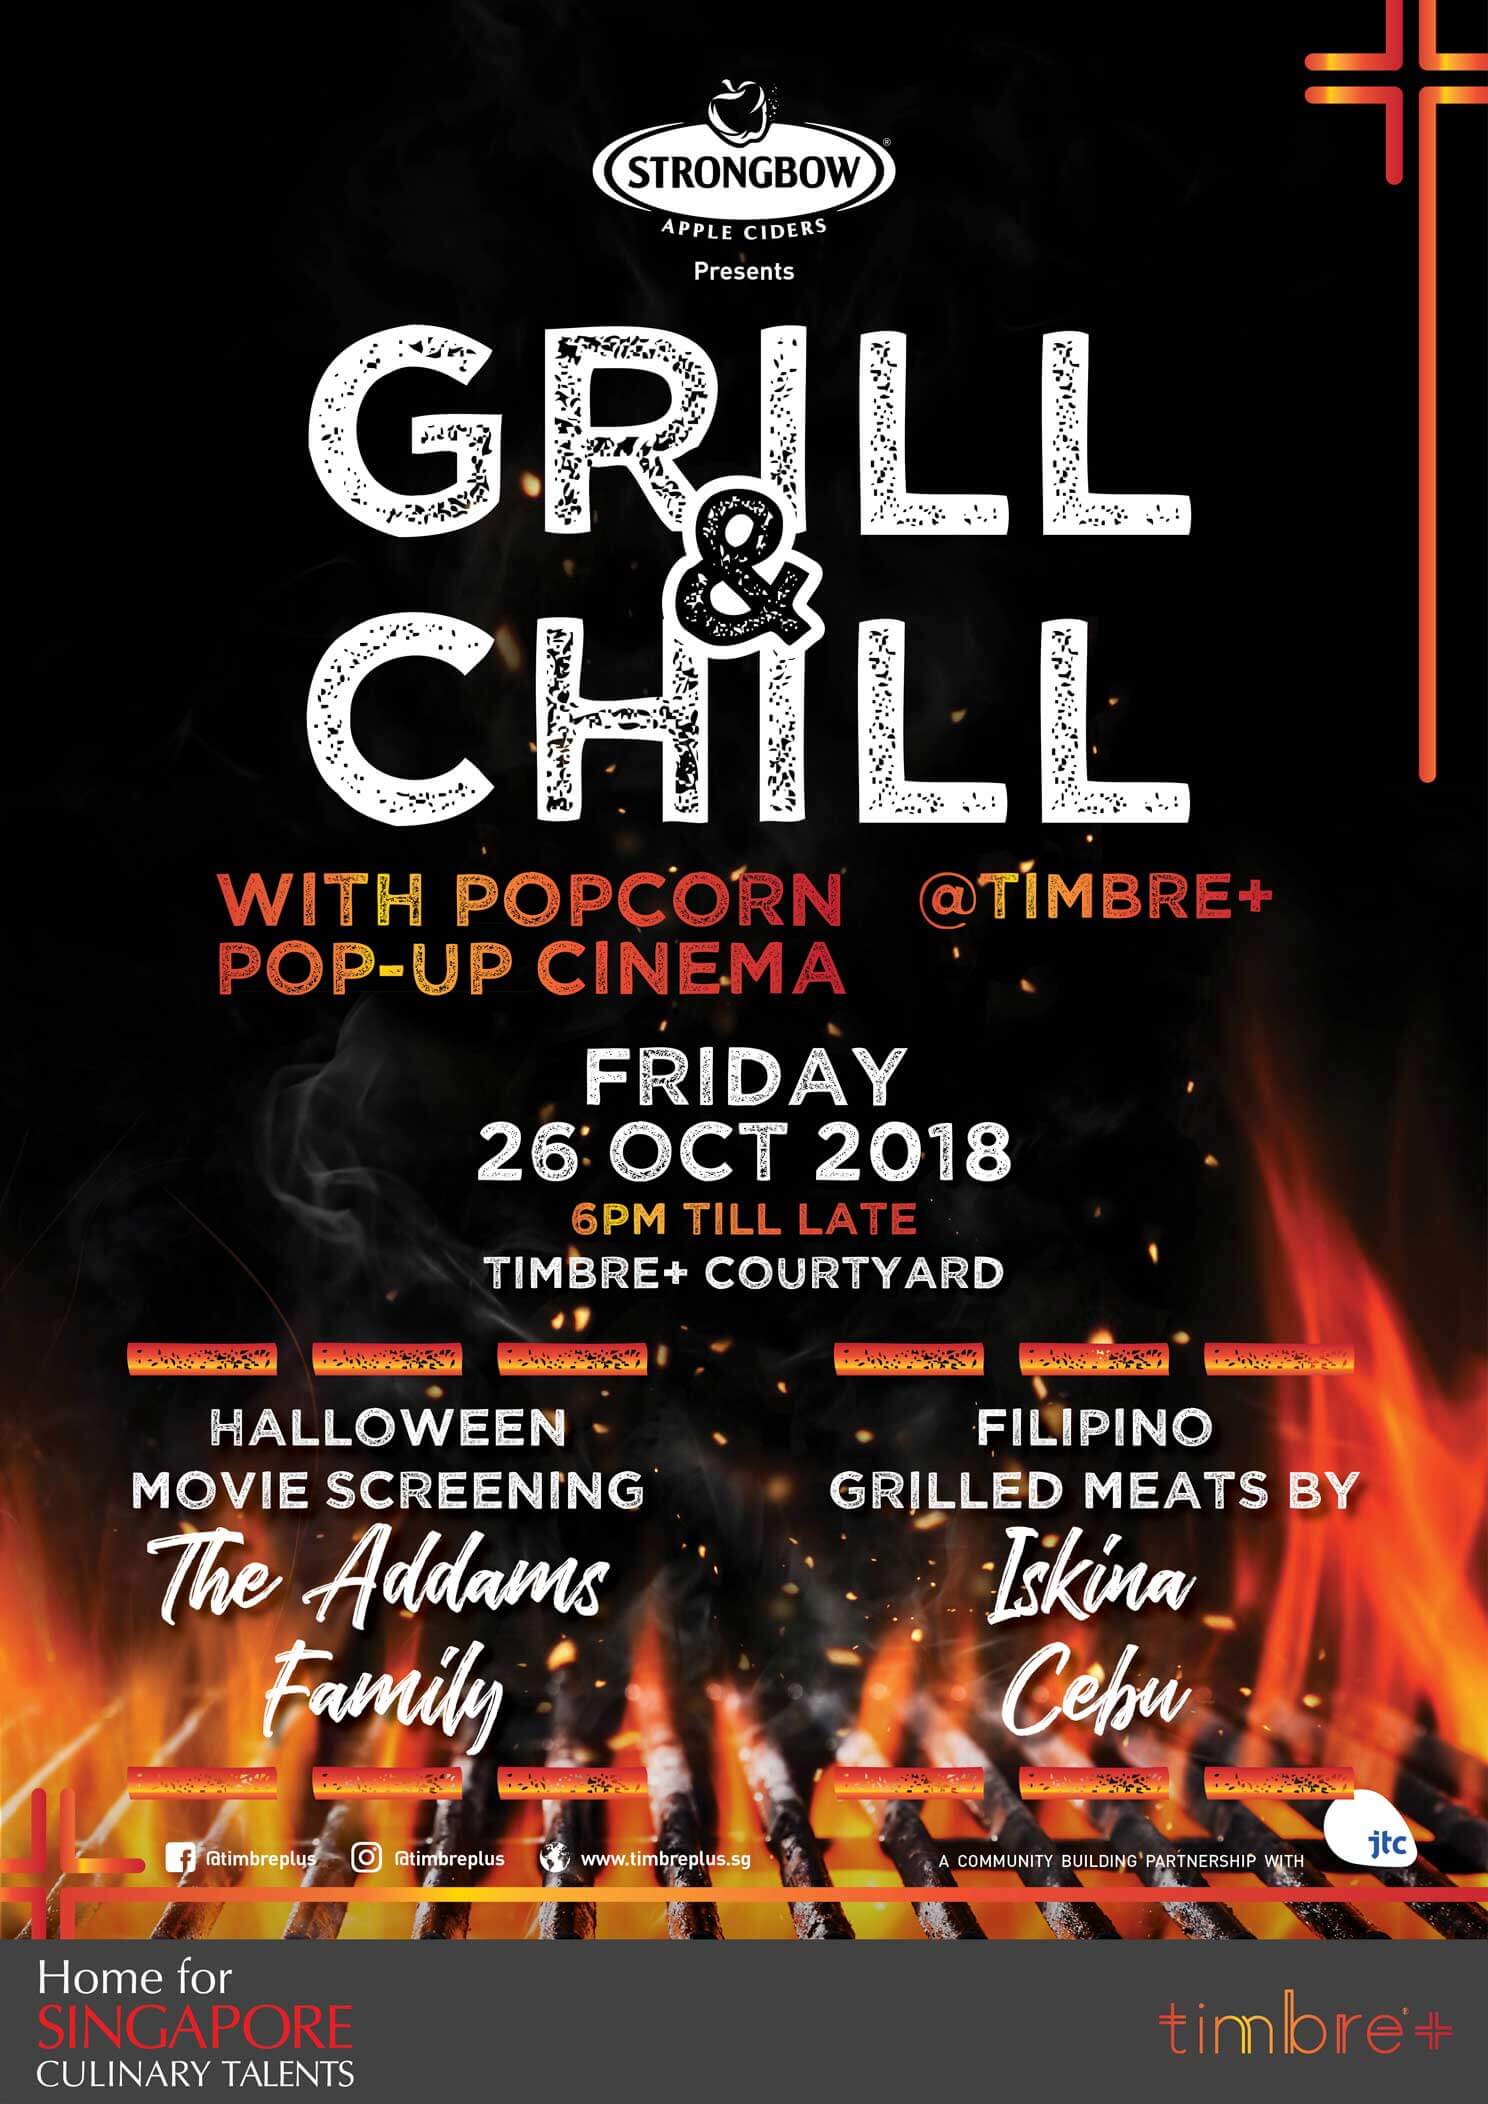 Chill & Grill